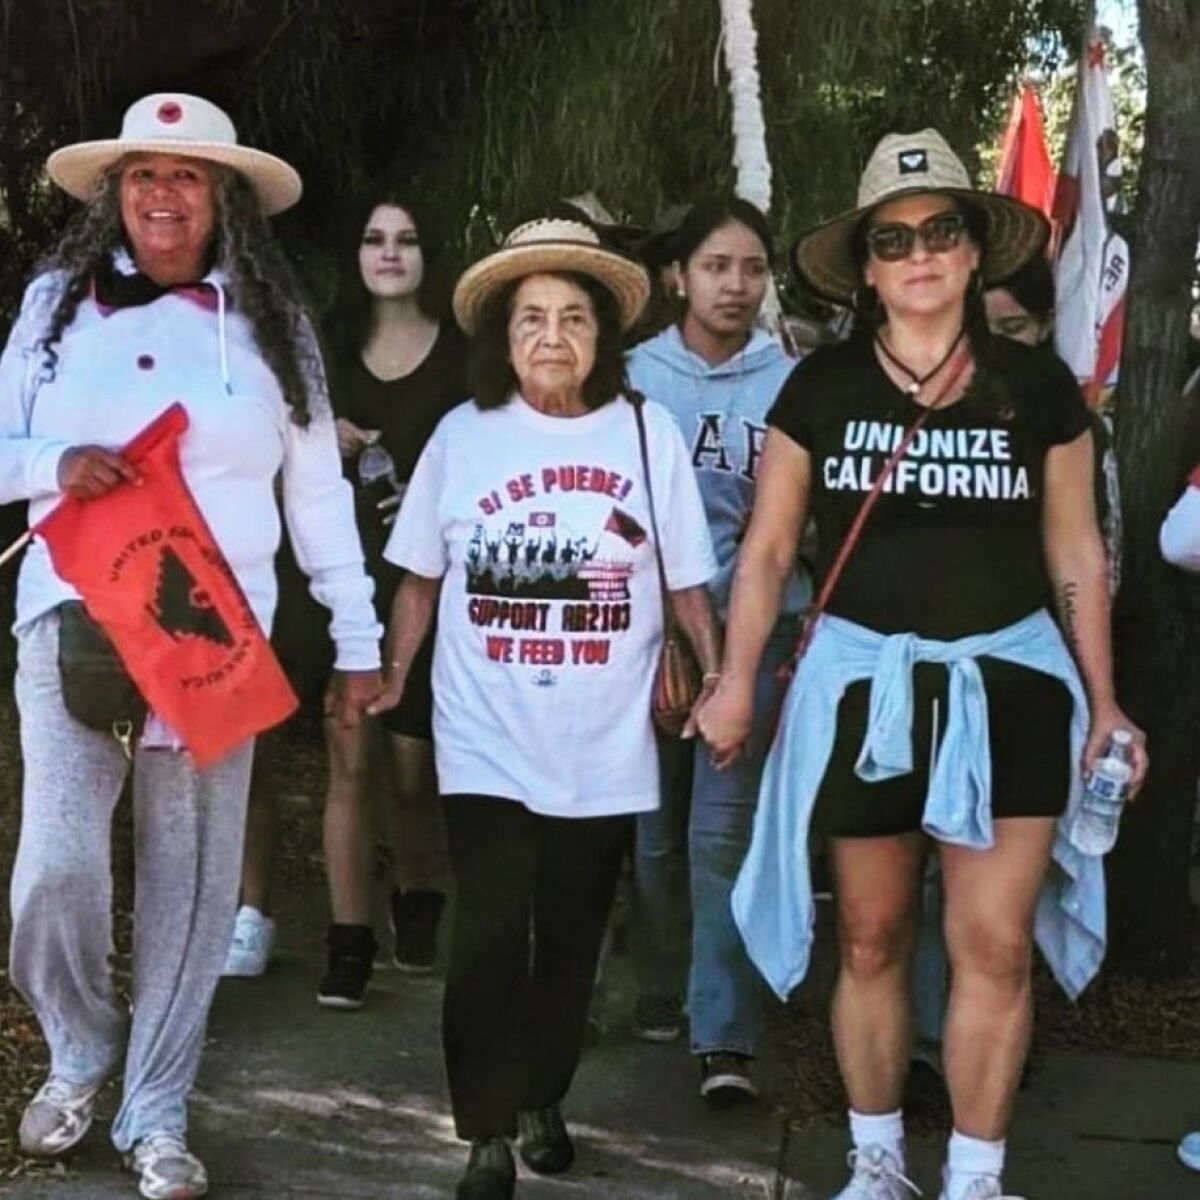 Dolores Huerta, Teresa Romero, and Lorena Gonzalez Fletcher during the portion of UFW's march to support AB 2183.